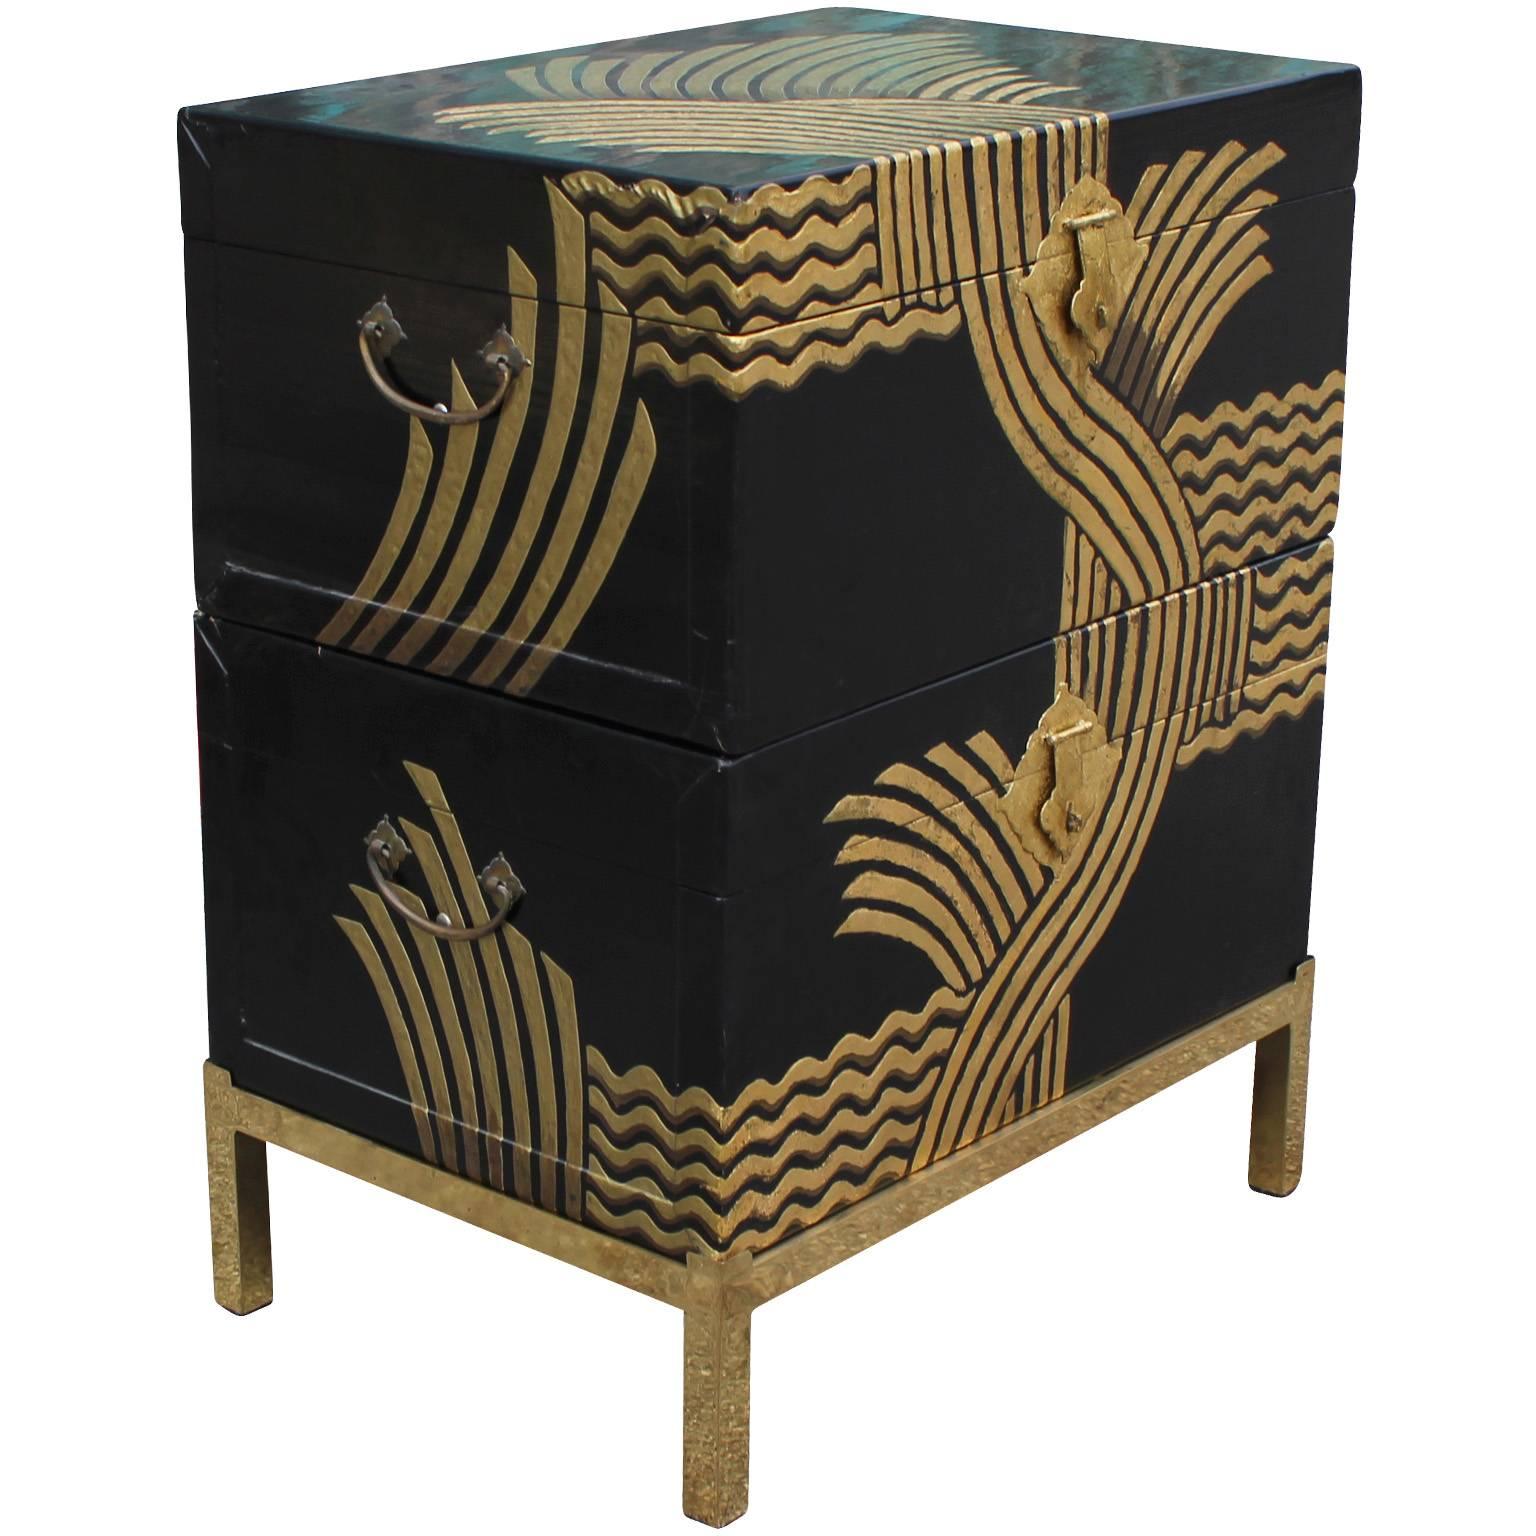 Fabulous stacked chests with black lacquer and gold on a brass base. Abstract motif chinoiserie. The chests have Asian writing the backs. 